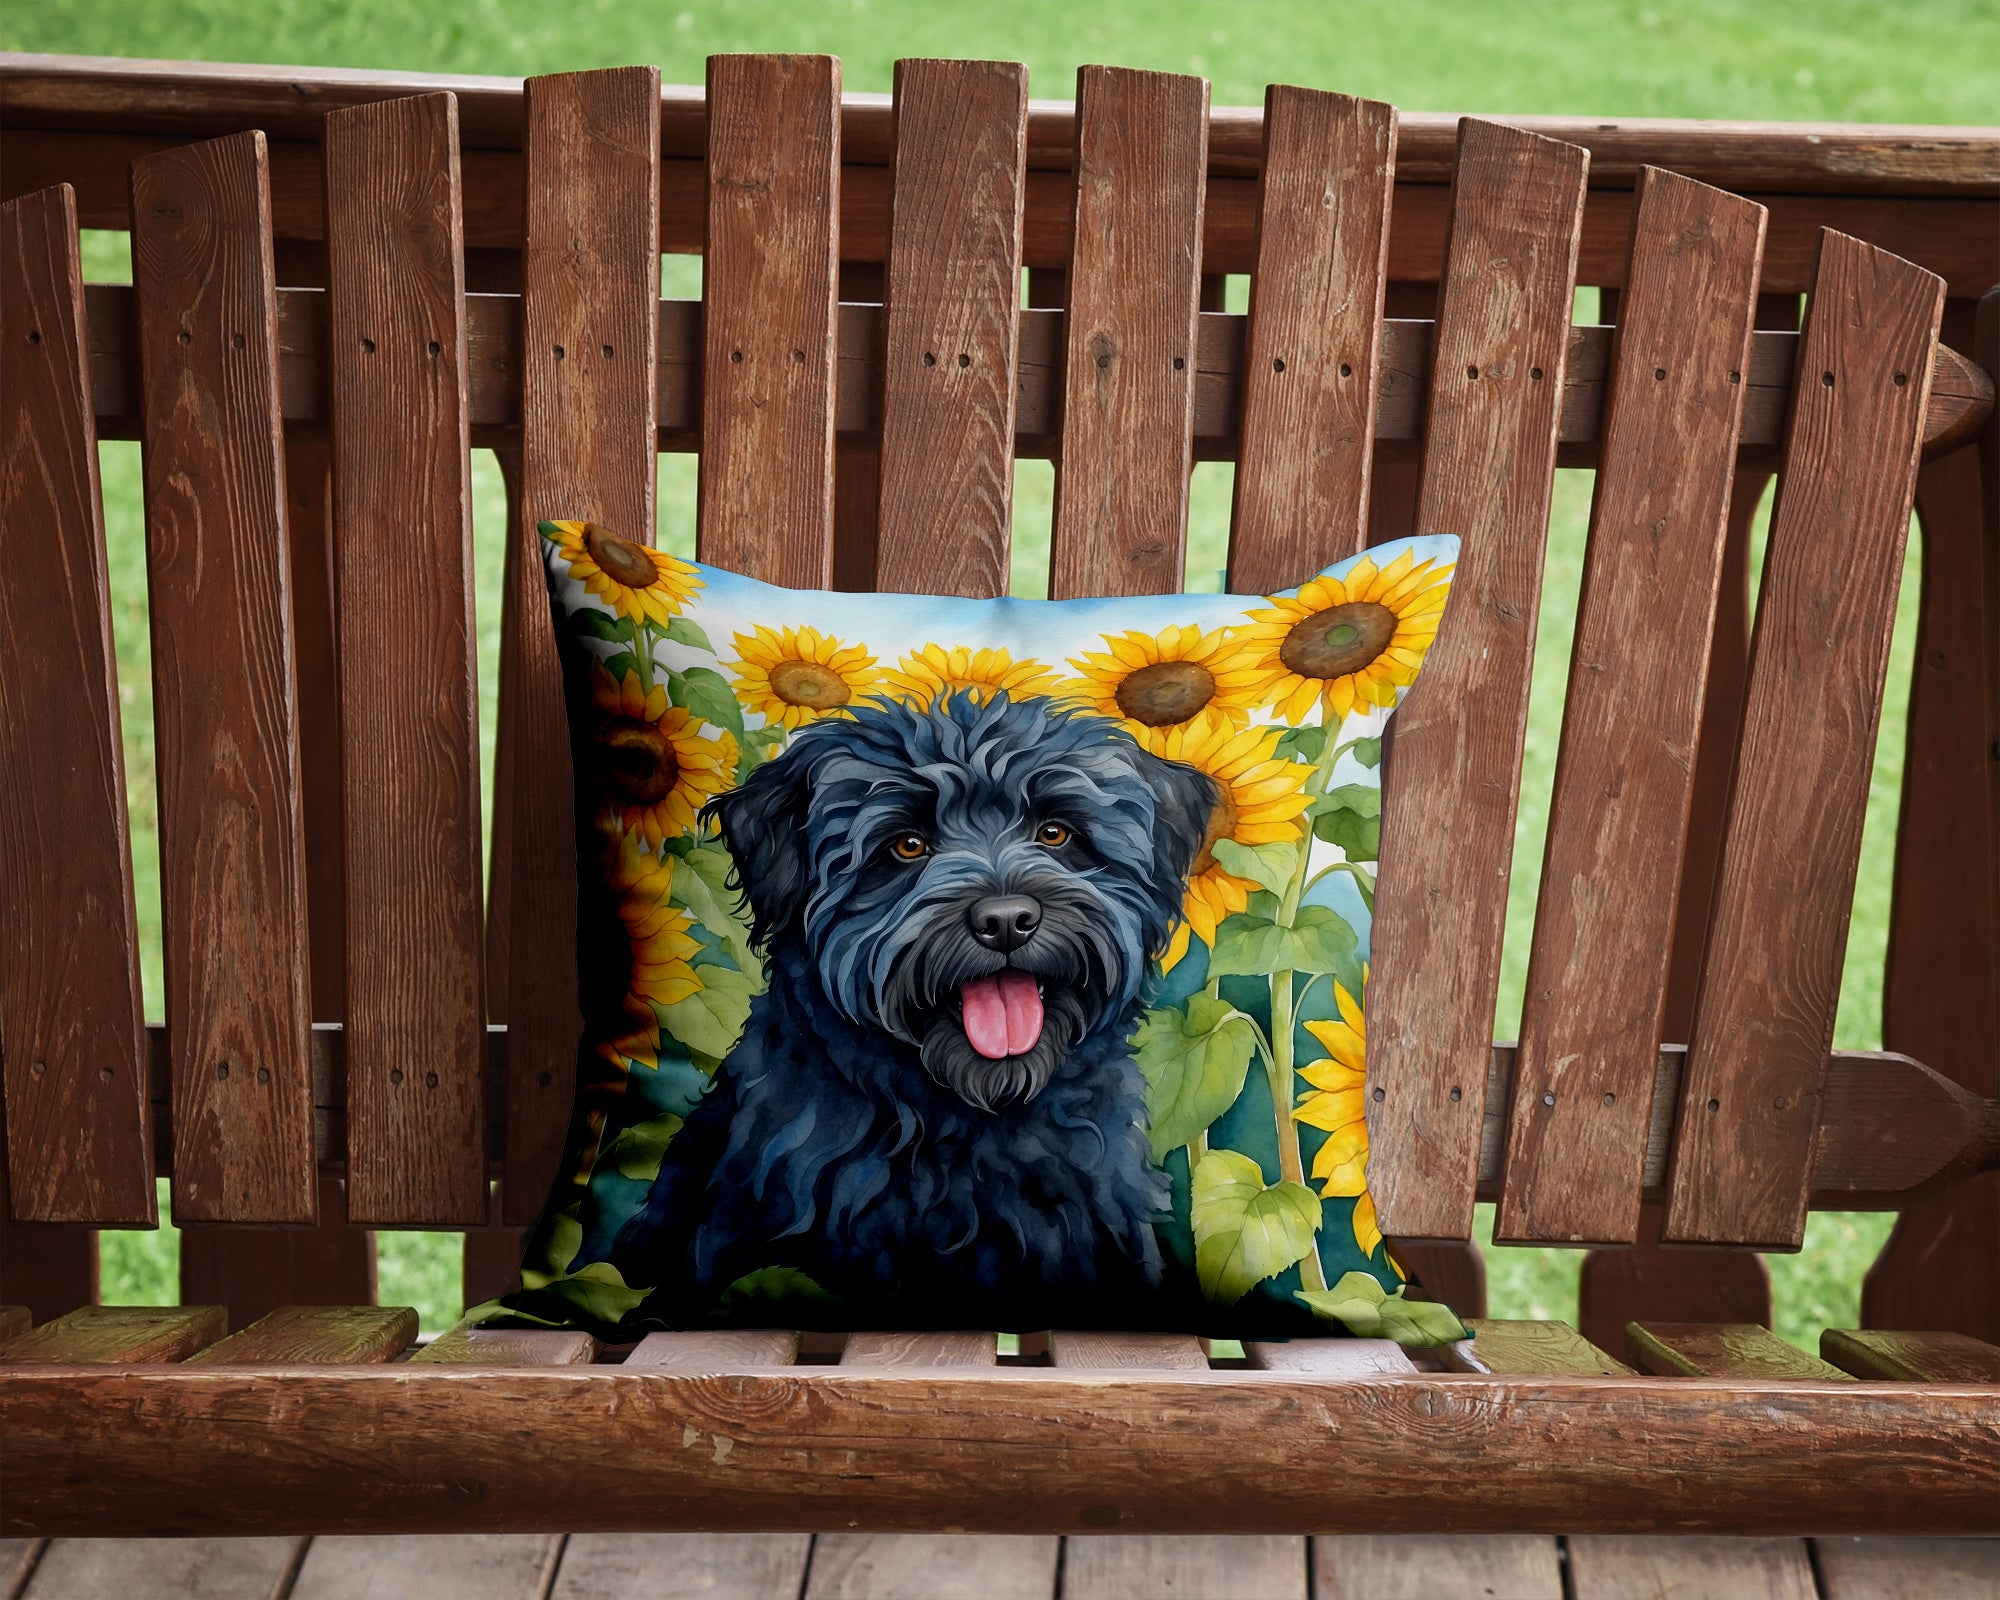 Buy this Puli in Sunflowers Throw Pillow